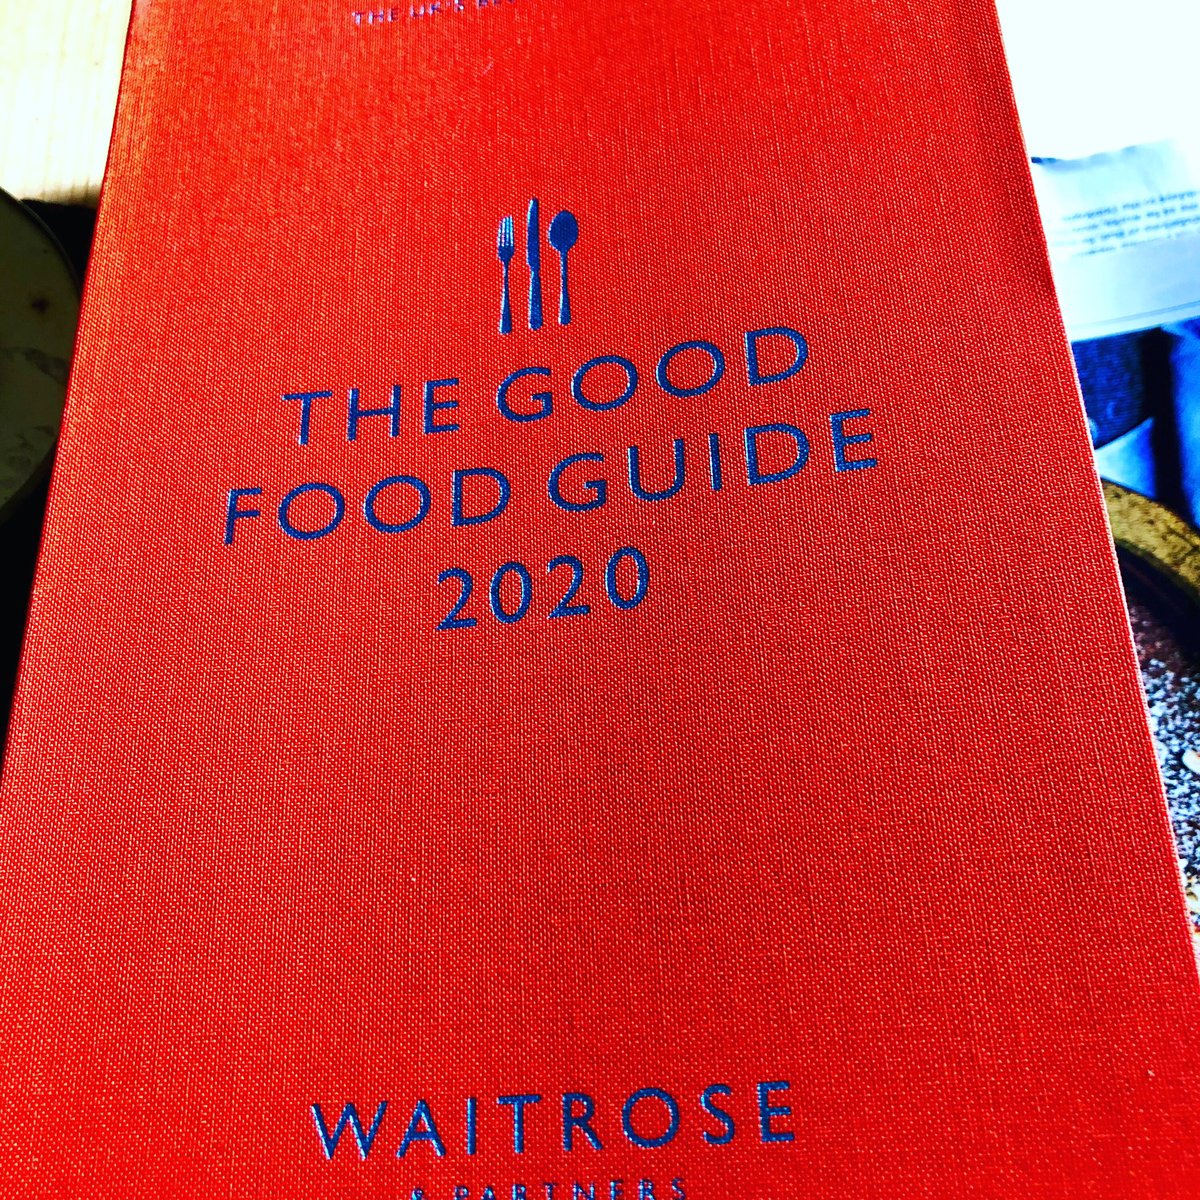 Arrived at last !!!!! #goodfoodguide #goodfoodguide2019 #restaurants #foodies #foodbible #foodblog